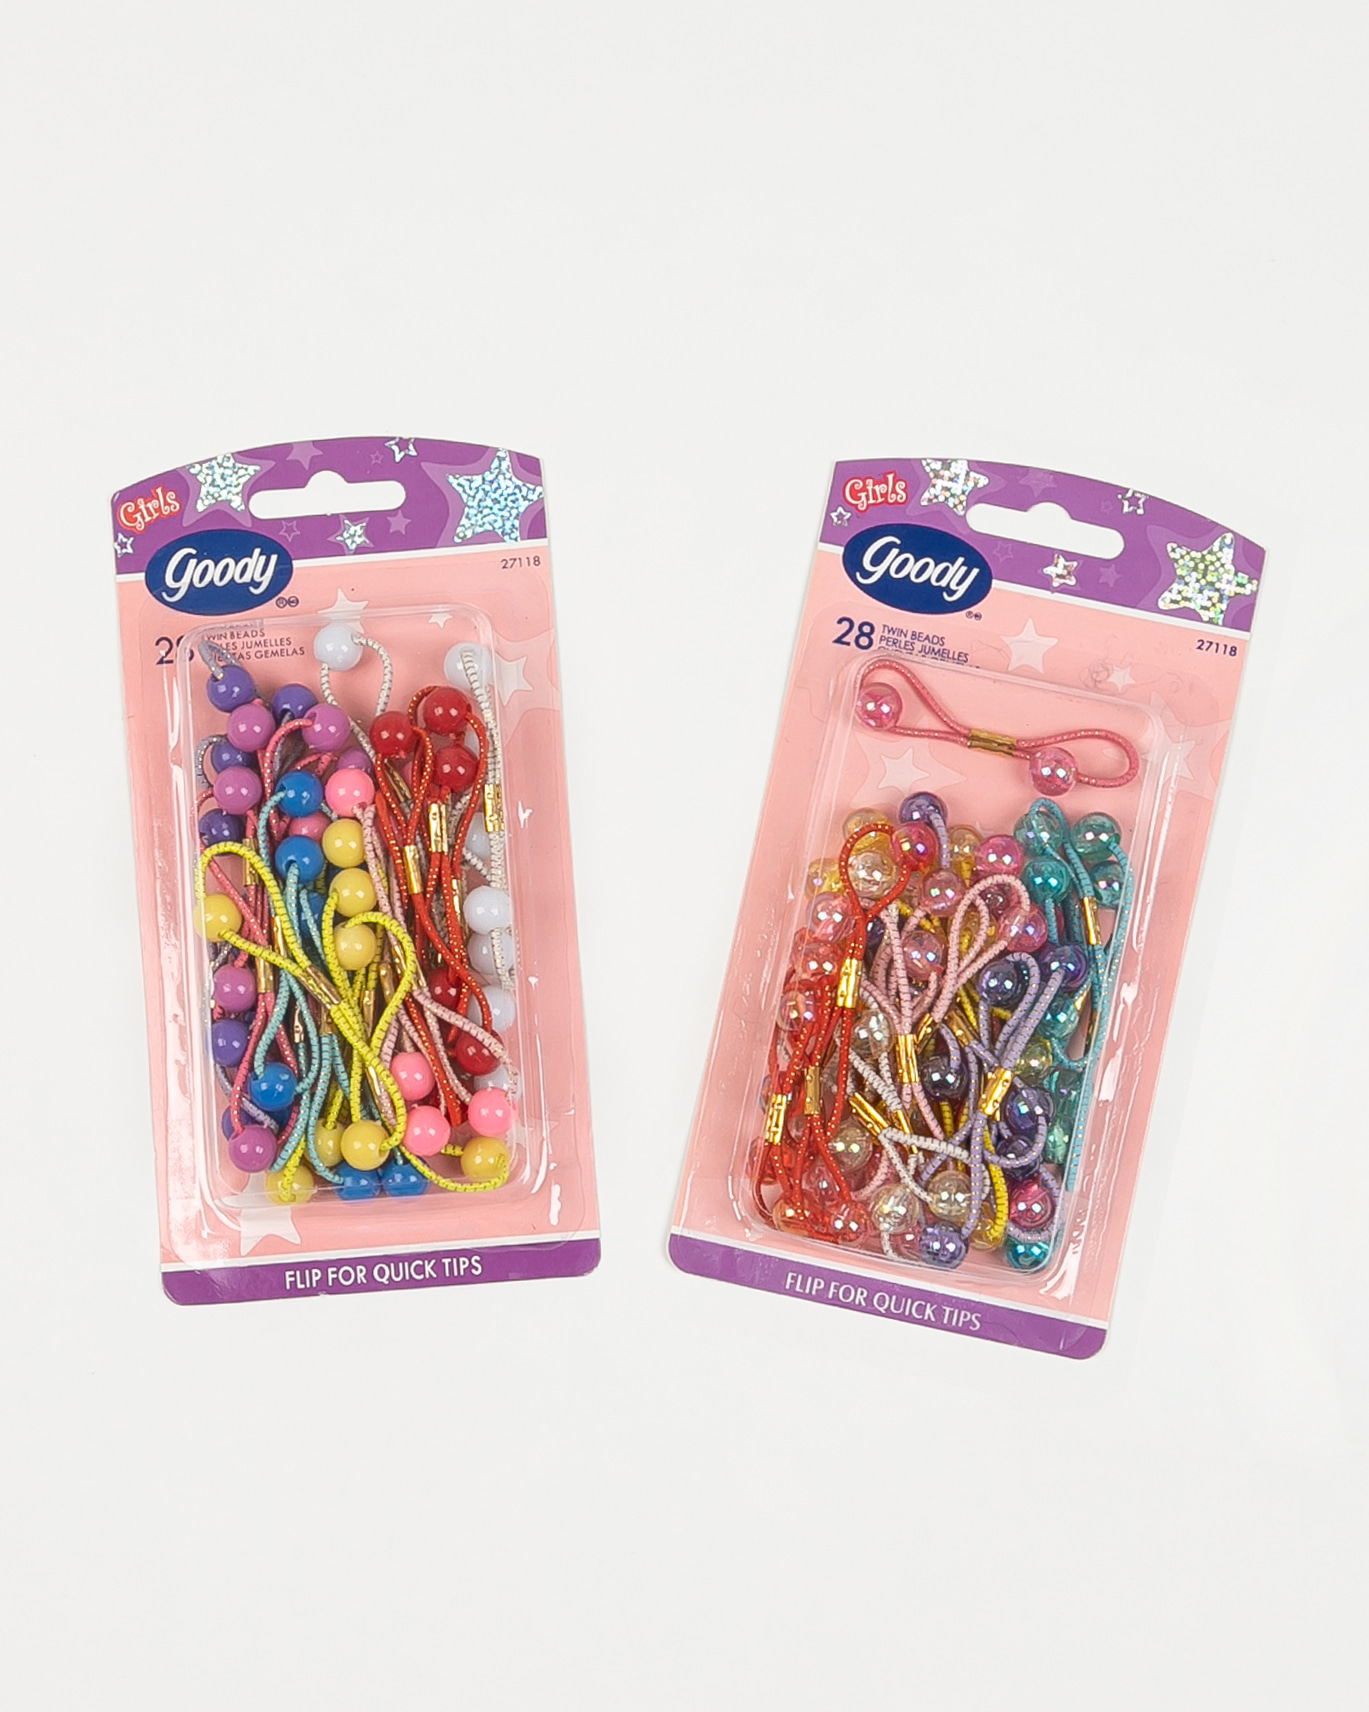 playngrow Goody Girls Twinbead Bubble Ponytailers (28pcs)